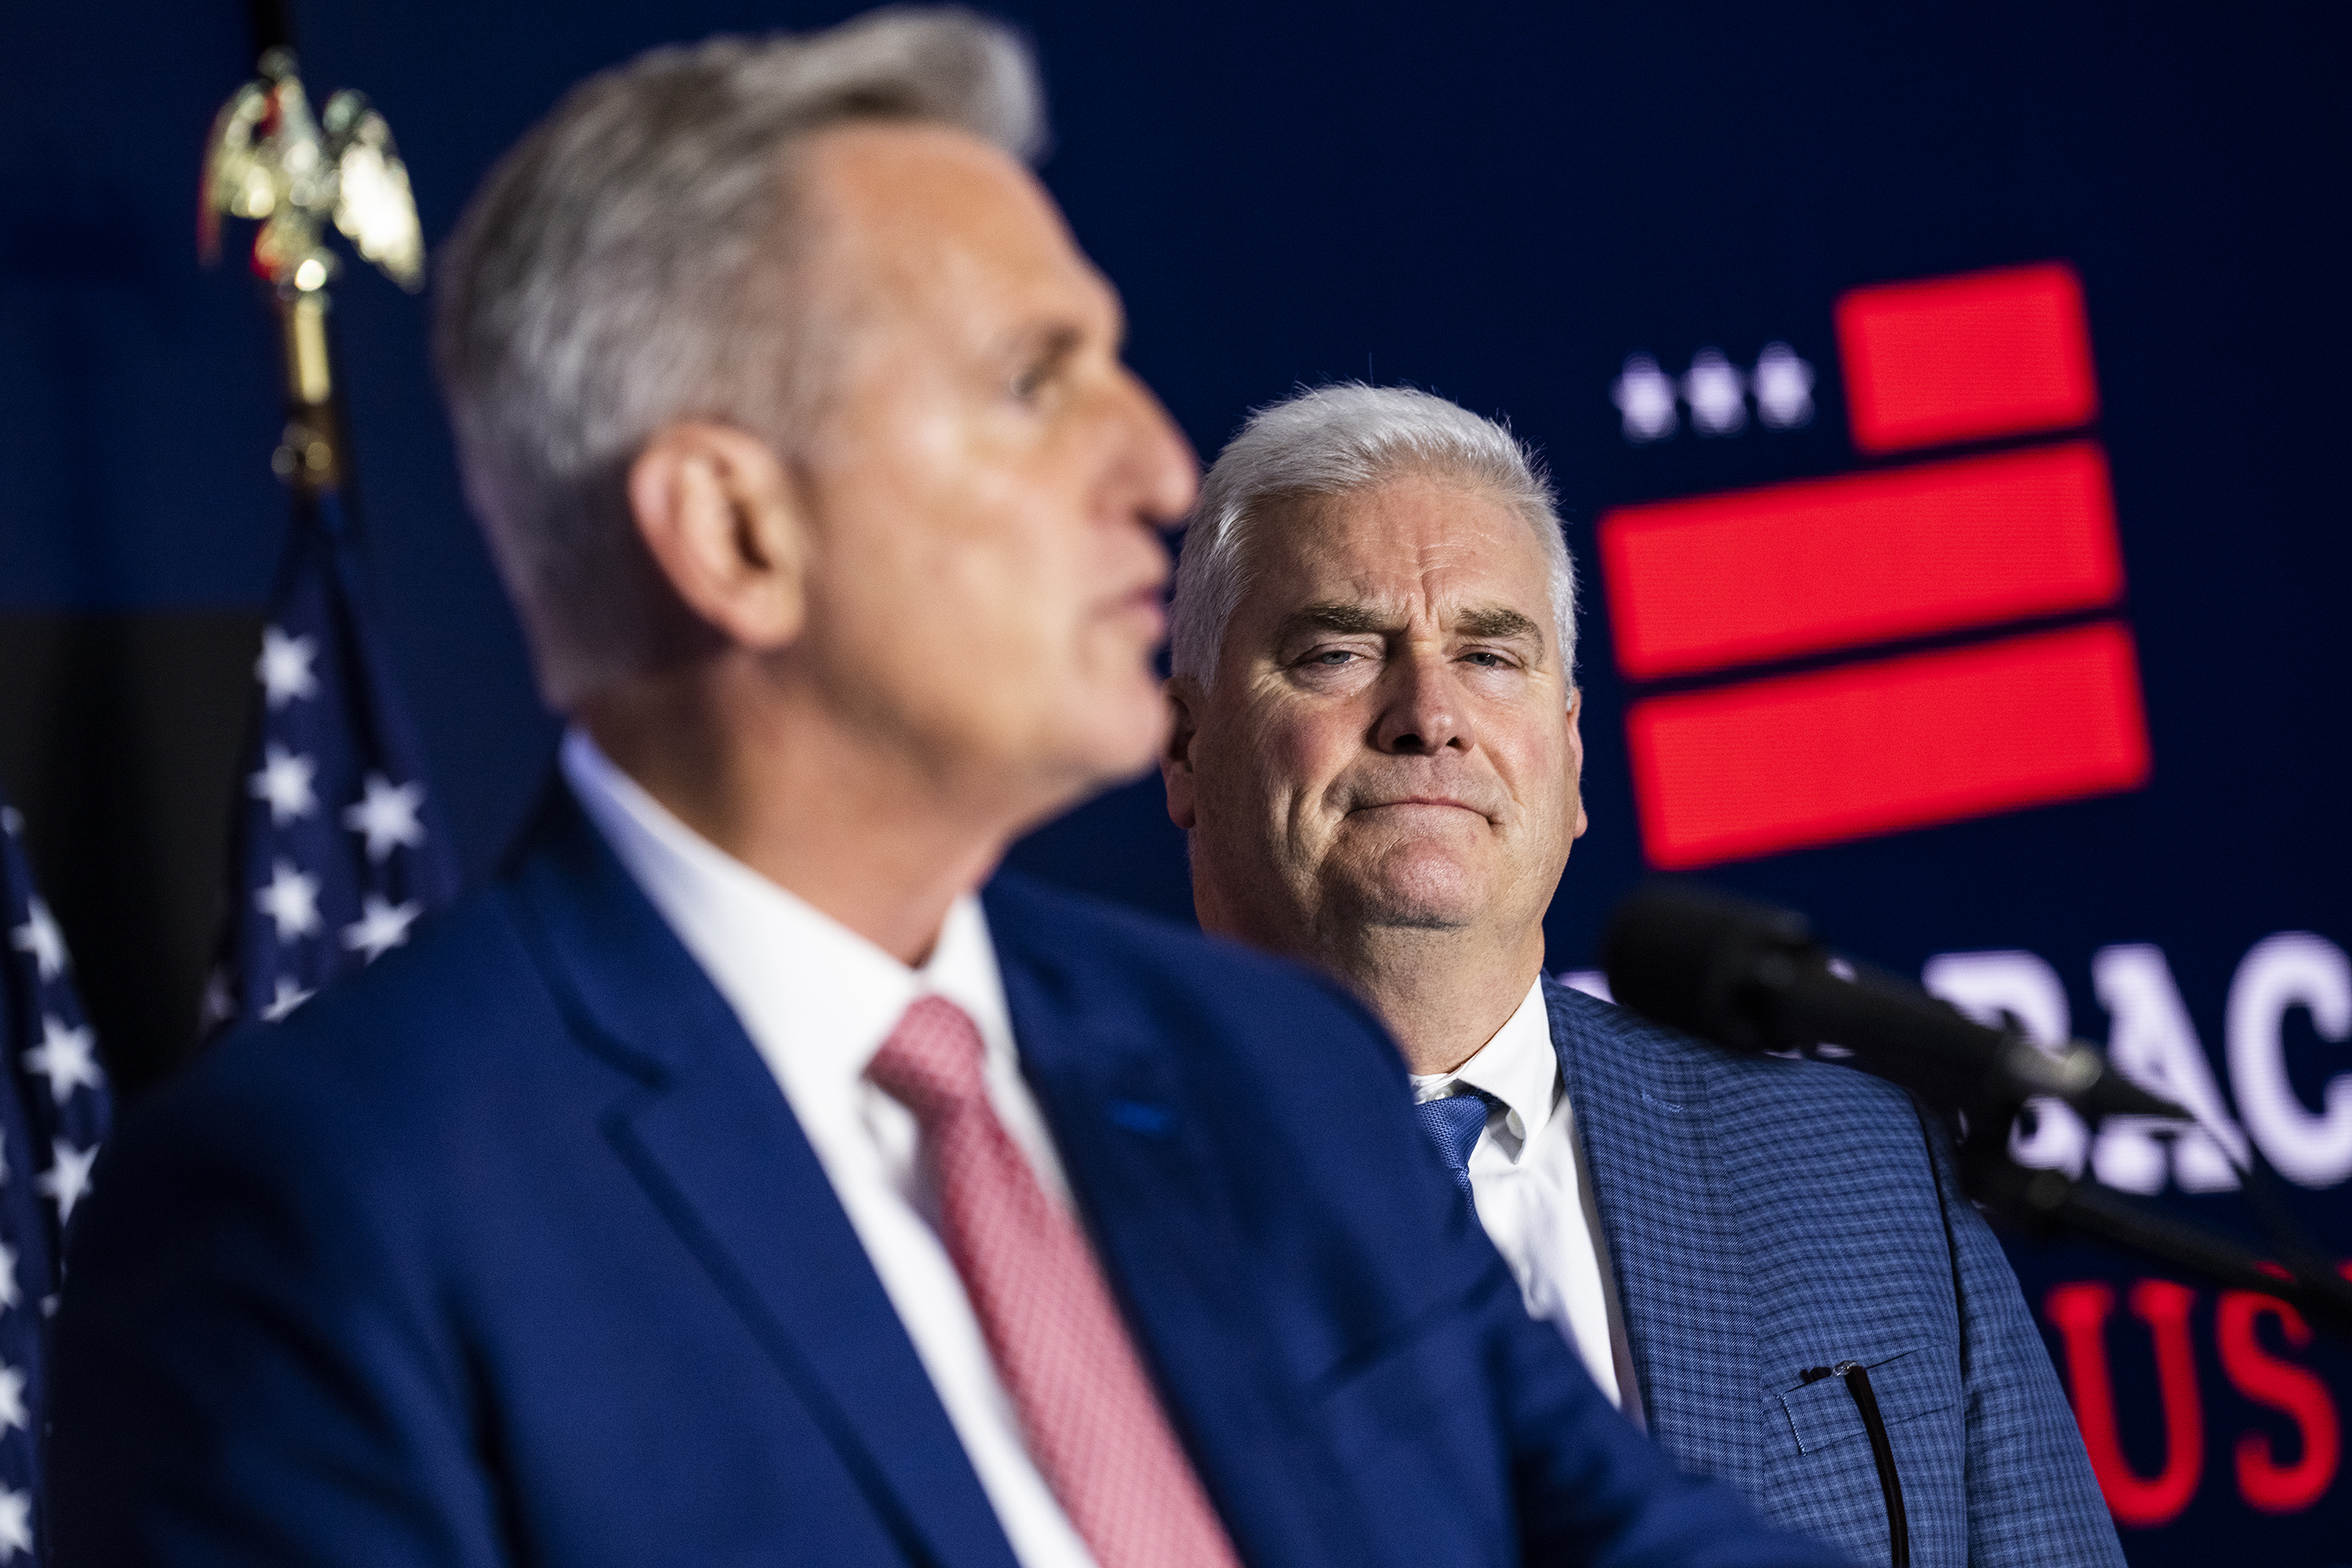 Rep. Tom Emmer (R) address an Election Night party with House Minority Leader Kevin McCarthy (L) at The Westin Washington hotel in Washington, DC, on Tuesday, November 8.